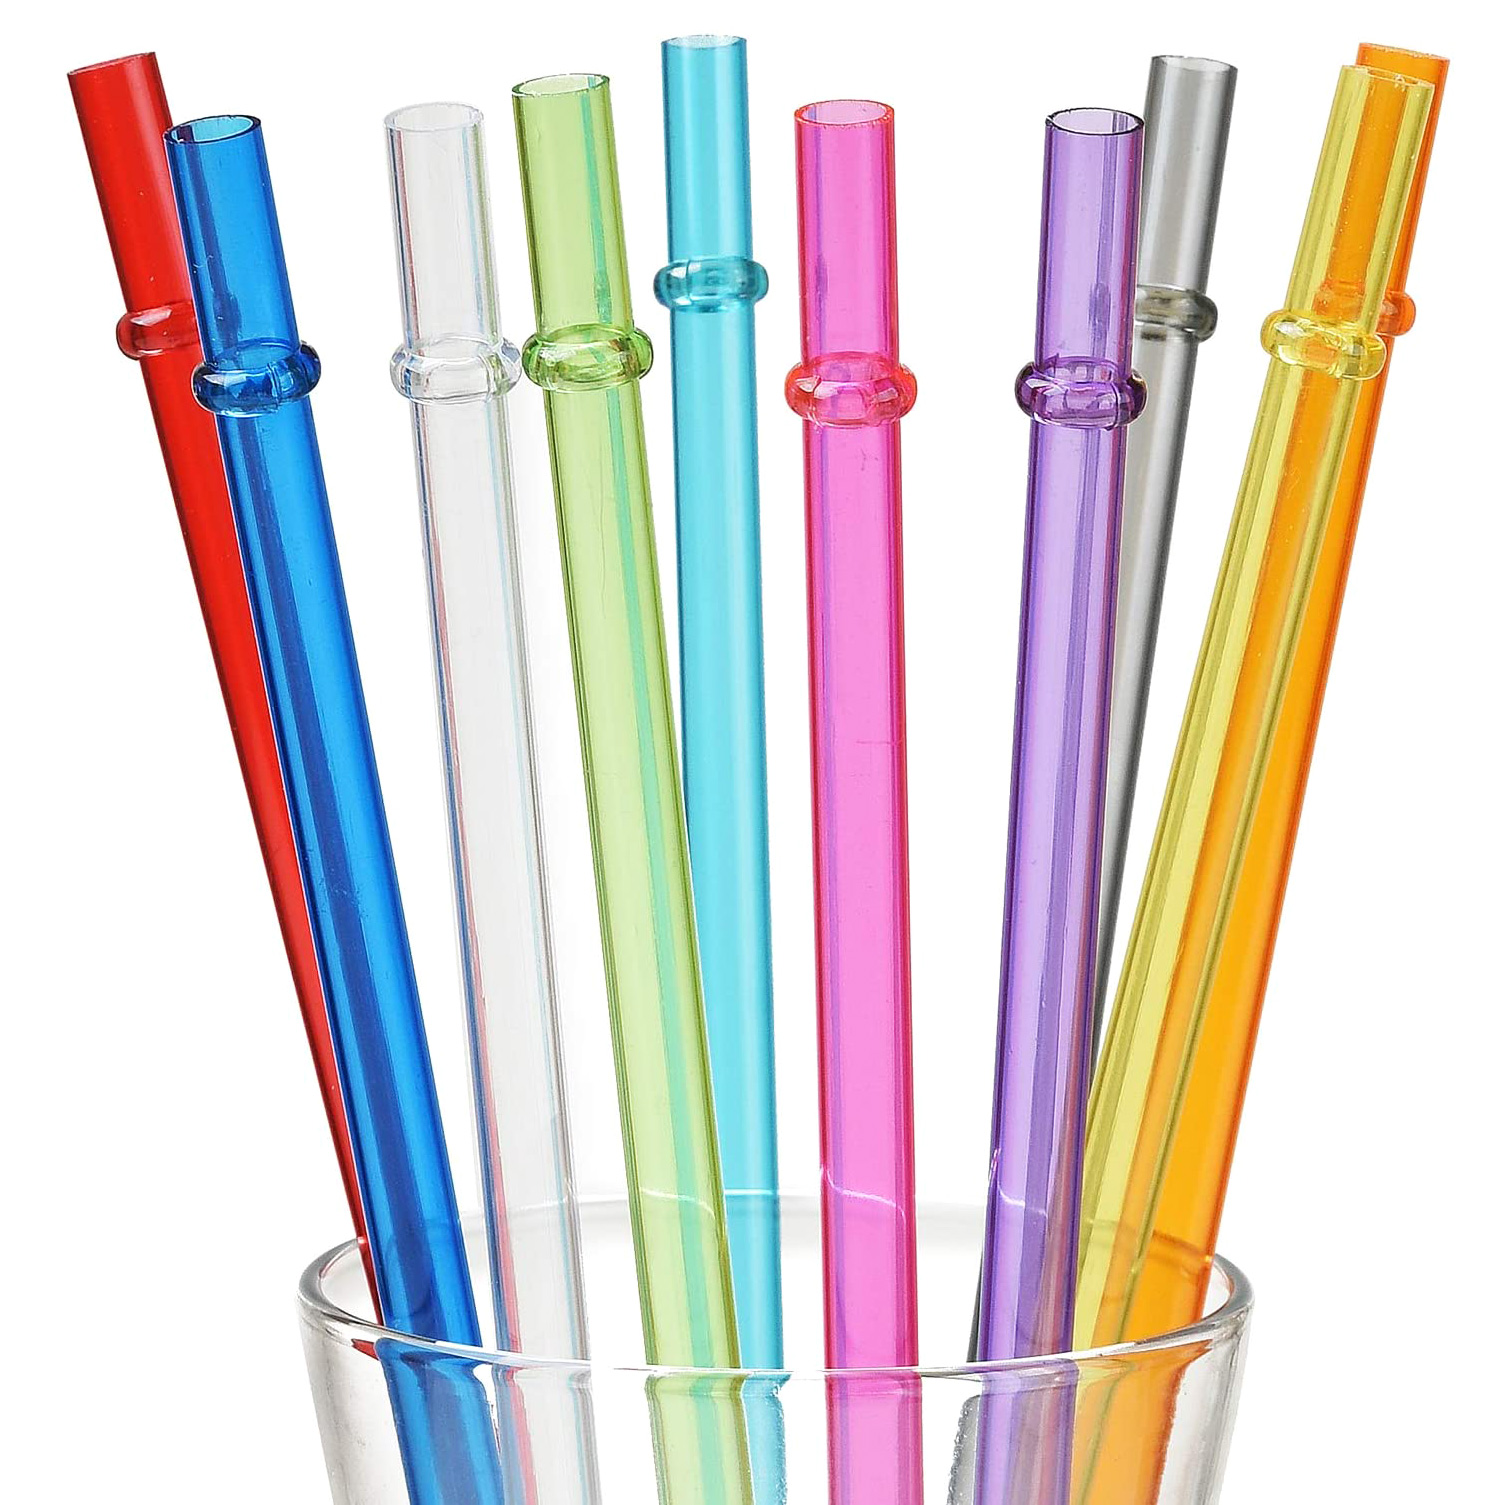 25 Pieces Reusable Plastic Straws. BPA-Free, 9 Inch Long Drinking  Transparent Straws Fit for Mason Jar, Yeti Tumbler, Cleaning Brush Included  